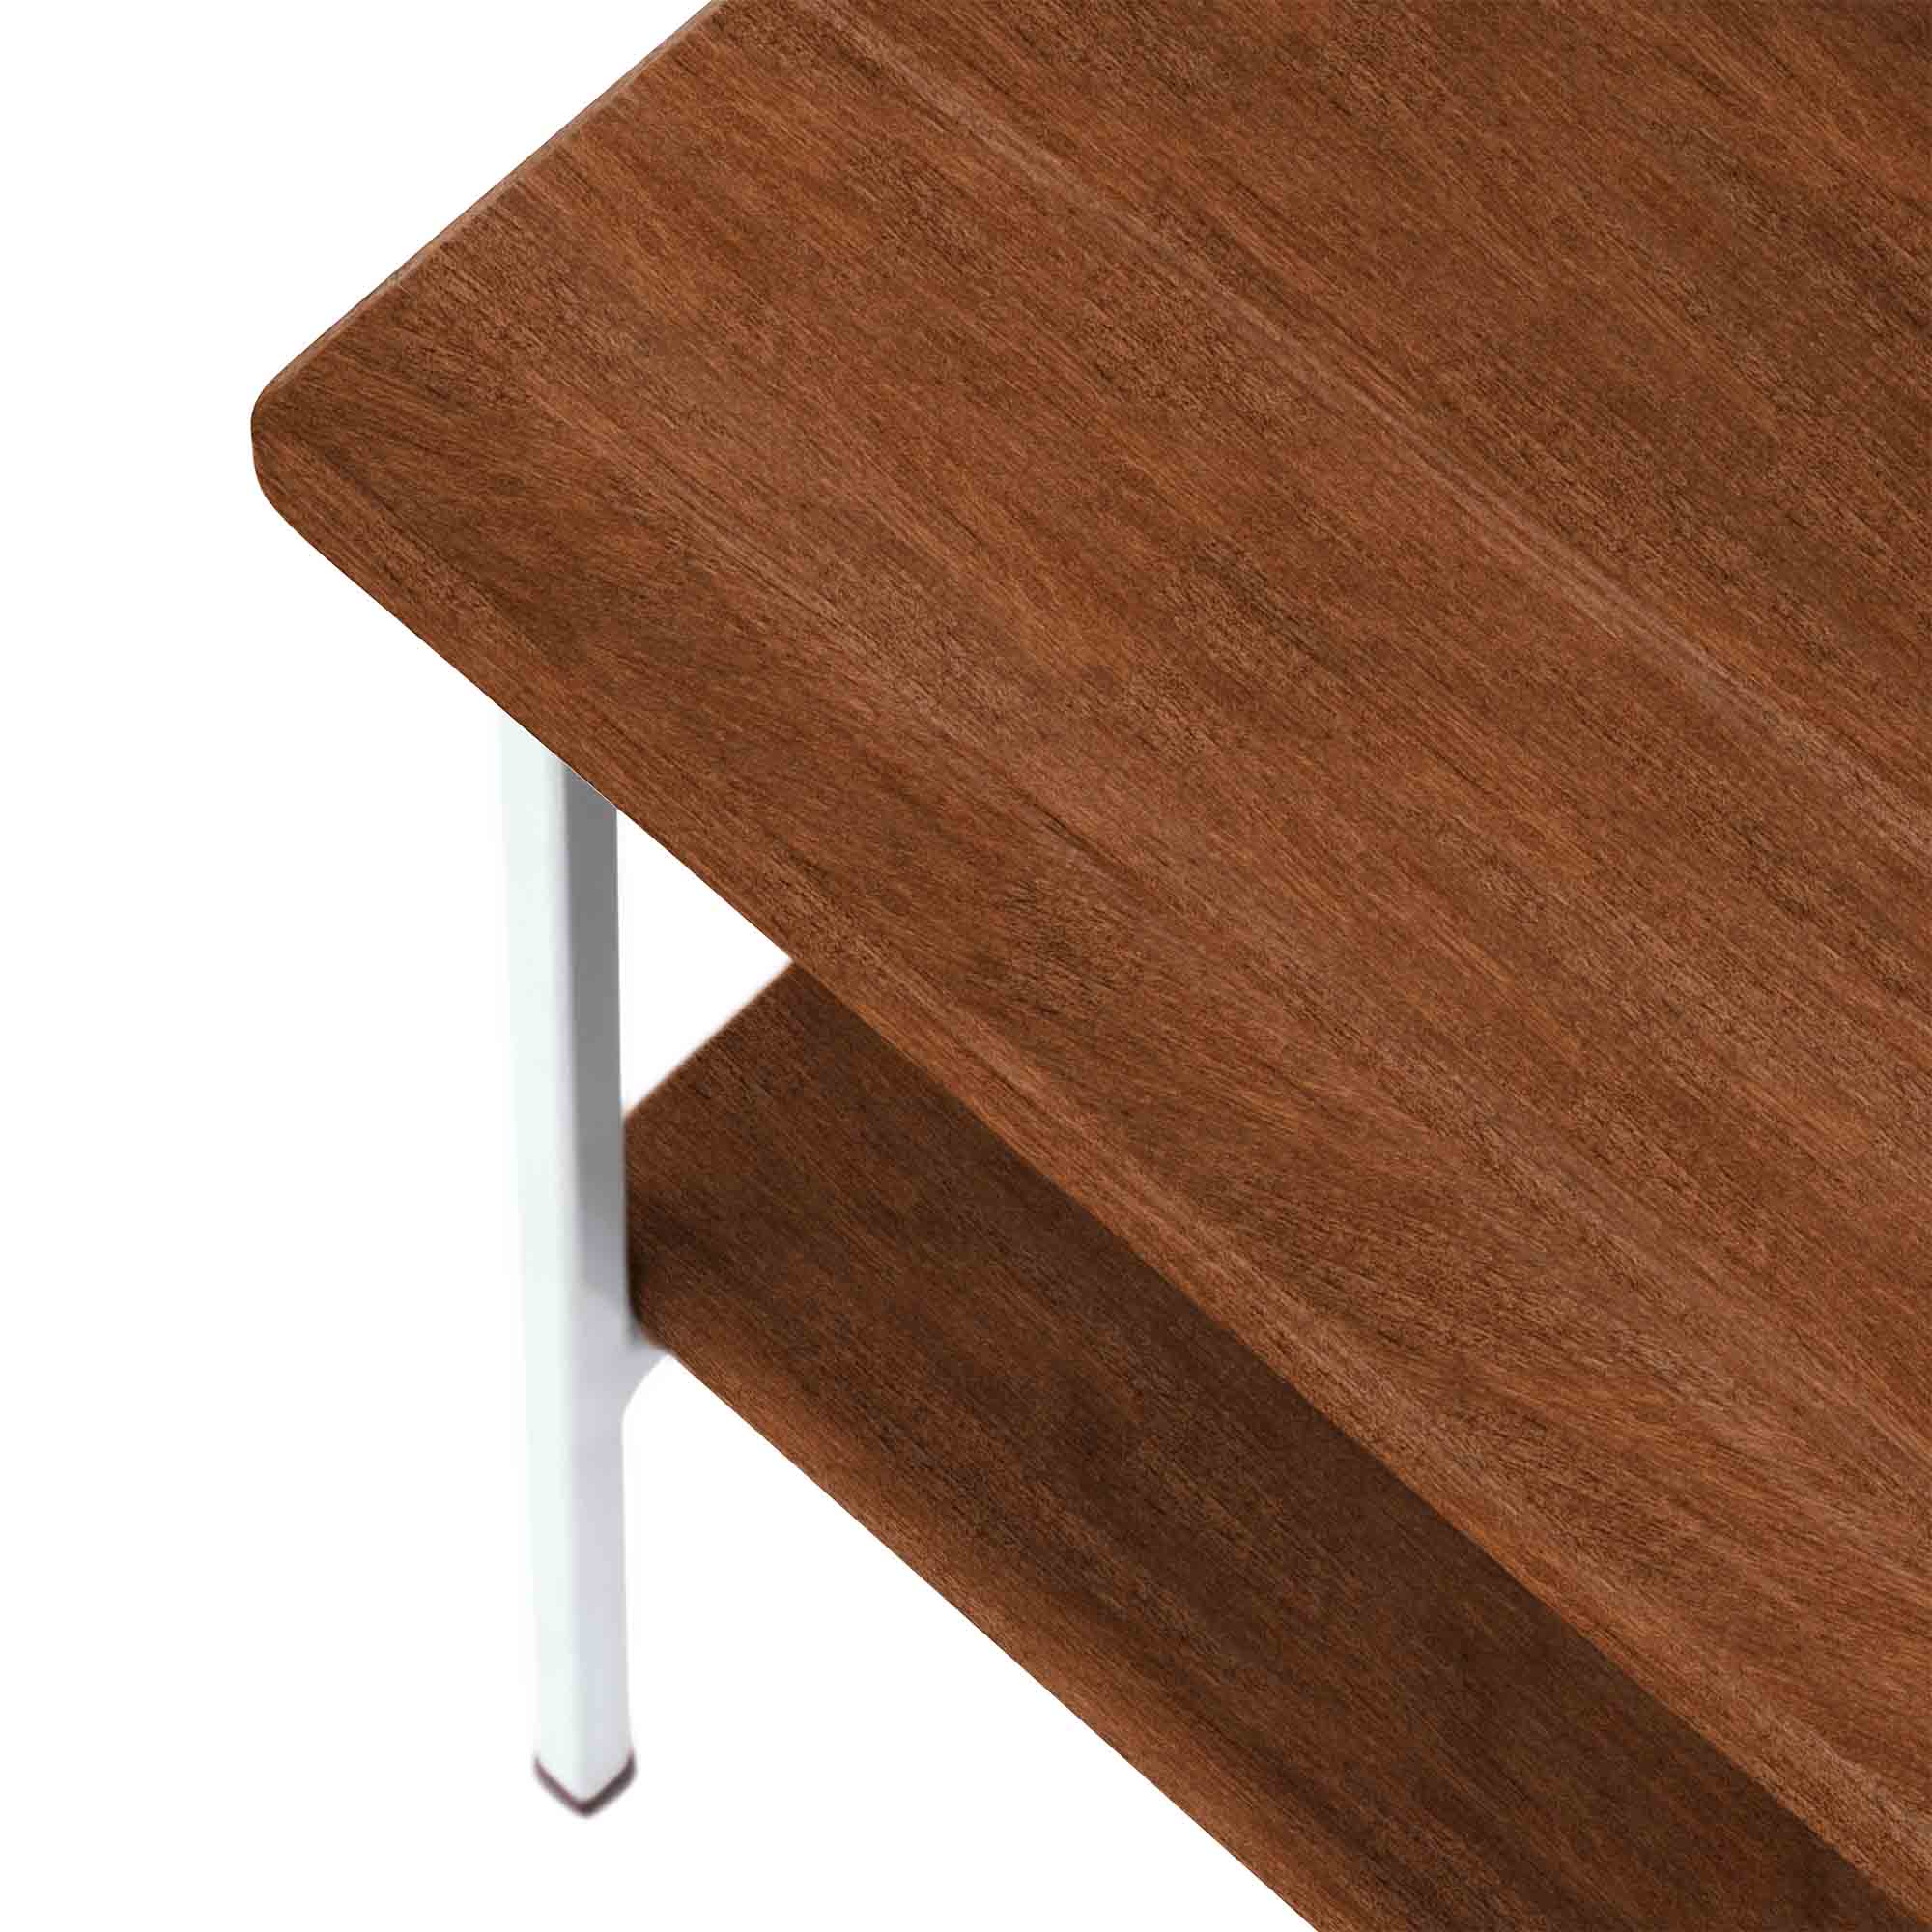 Living Room Table, Beech Wood, Walnut Colour white frame, top detail view